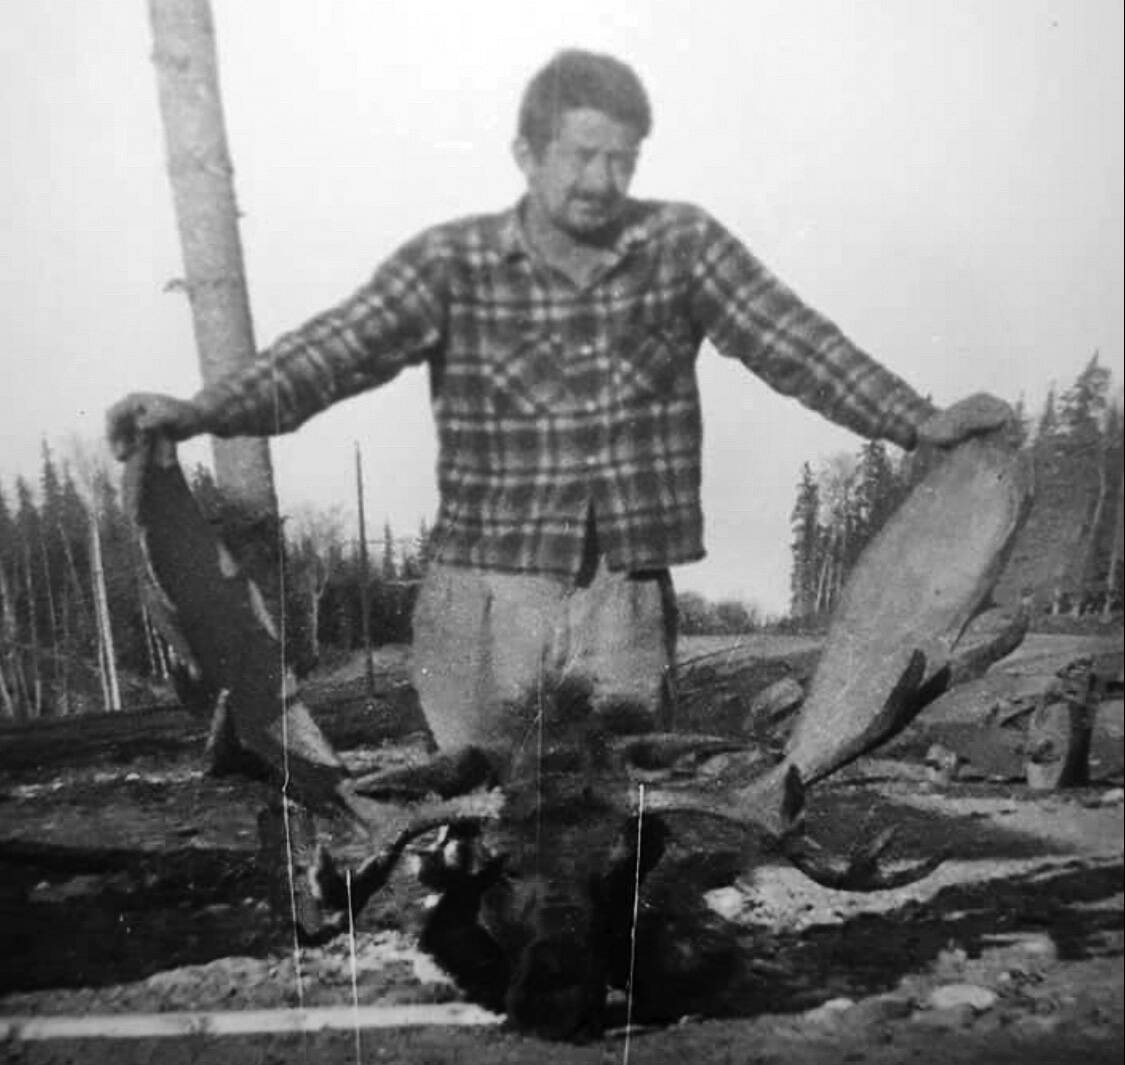 Jack Griffiths stands over the head of a bull moose, probably in the 1950s. (Public photo from familysearch.org)